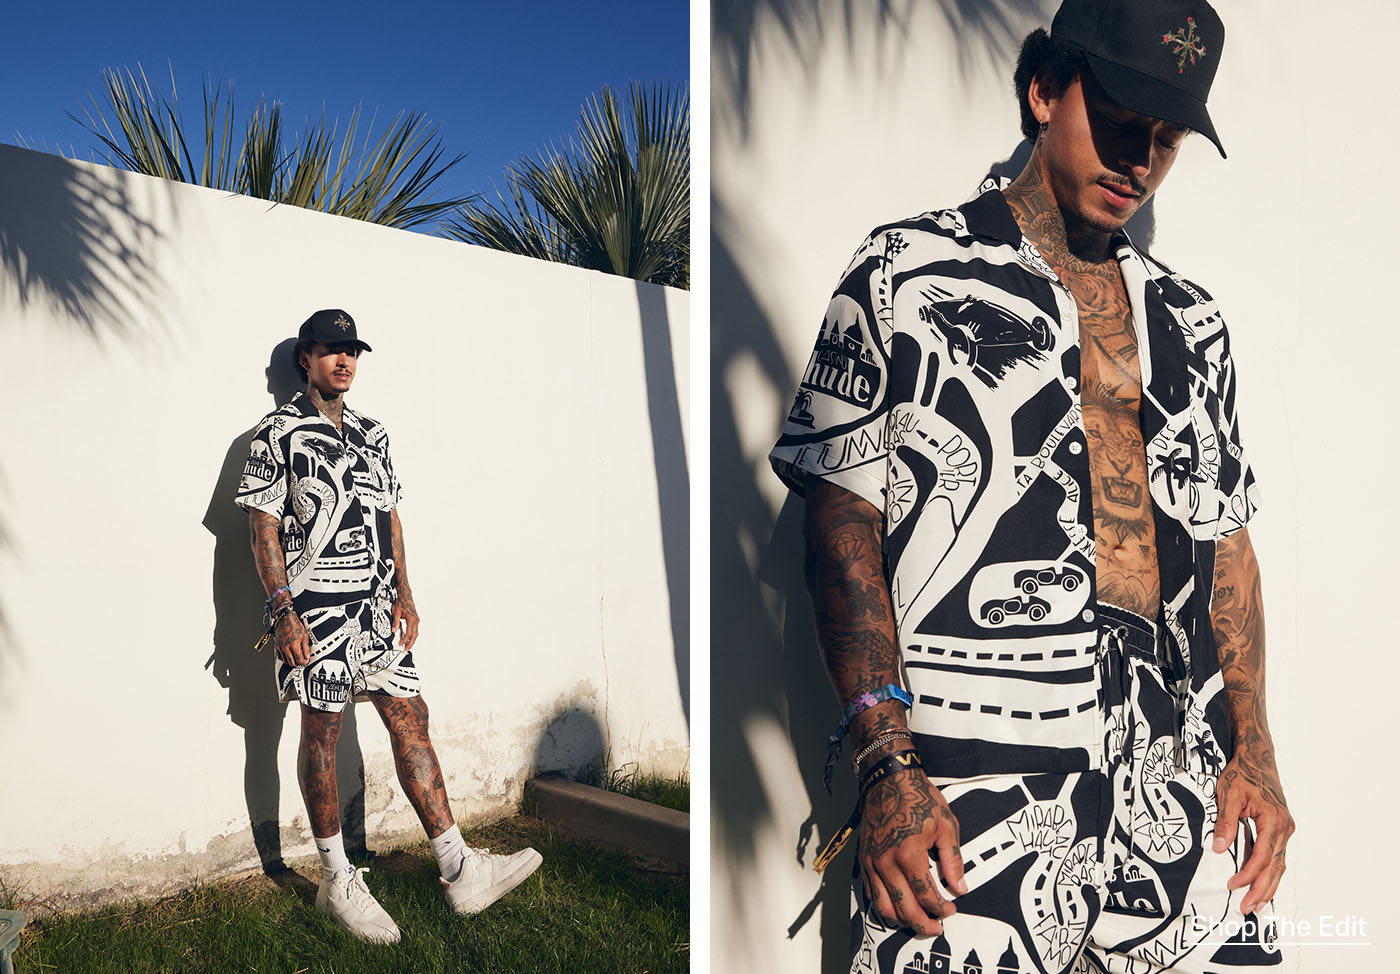 Nyjah posing near a concrete wall wearing black and white silk shirt and shorts.